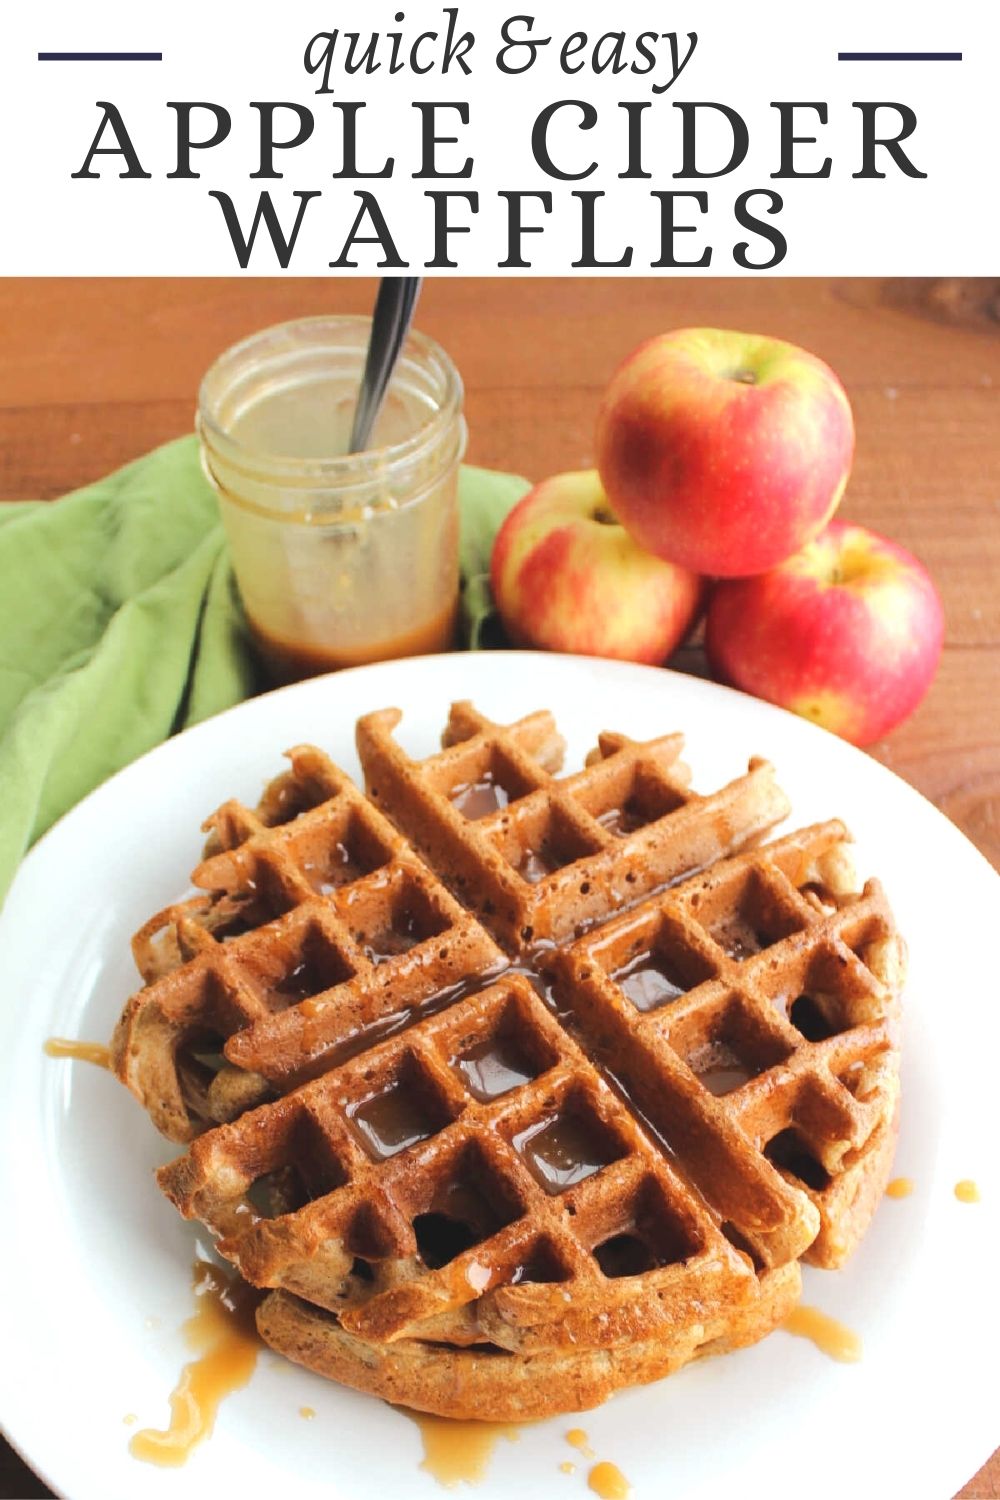 Apple cider waffles are flavorful and delicious. You can enjoy them with sweet or savory toppings. Use them as a base for pulled pork or drizzle them with syrup or caramel.